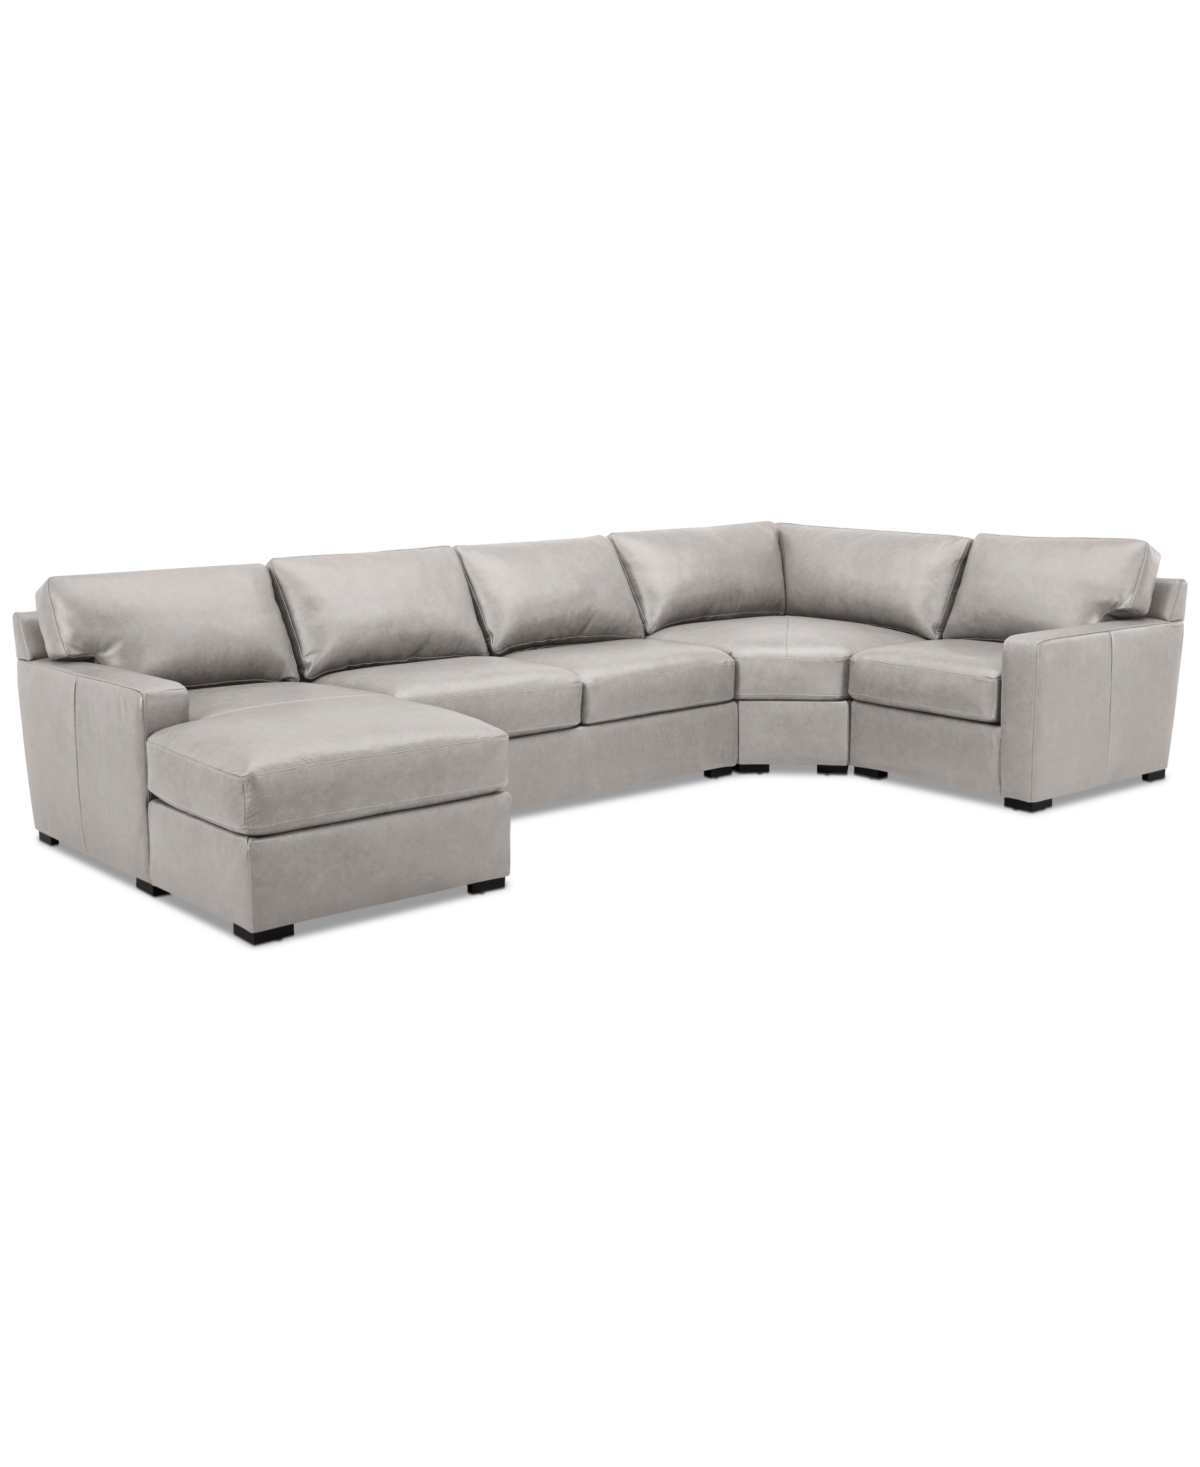 Macy's Radley 148" 4-pc. Leather Wedge Modular Chaise Sectional, Created For  In Ash